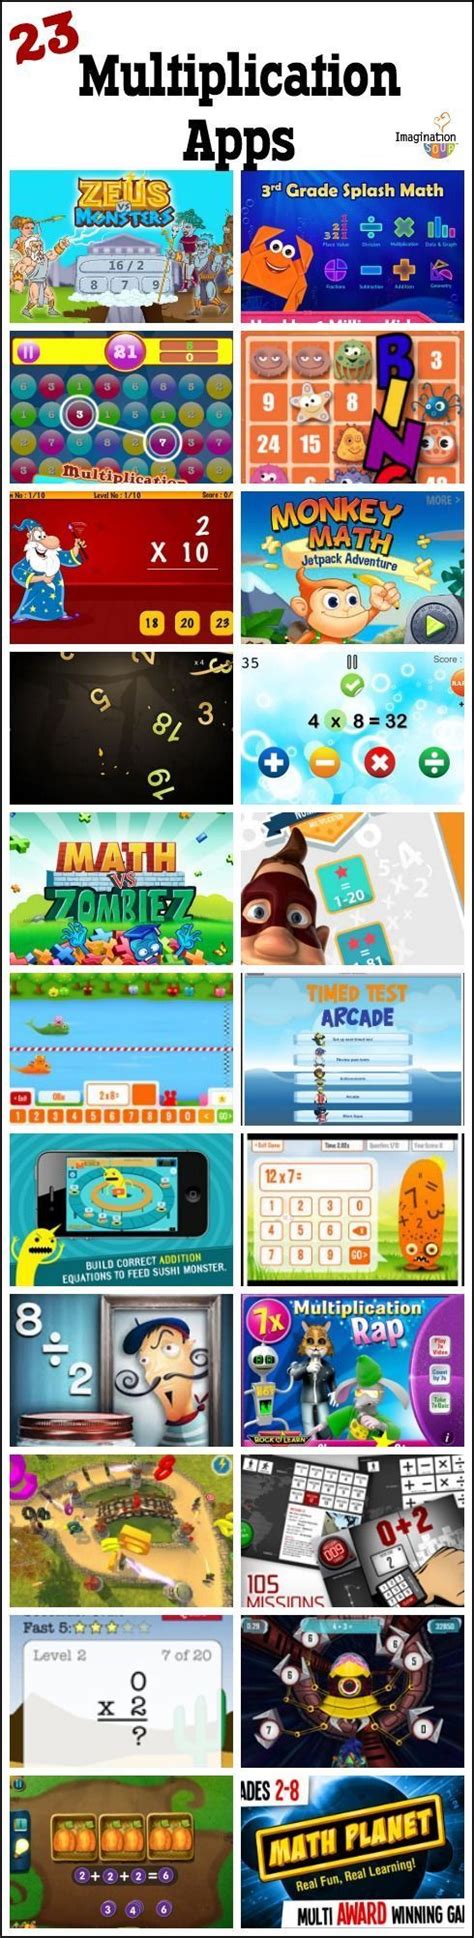 Top 8 free preschool apps for android users. Free Preschool Apps Without In App Purchases - All About Apps